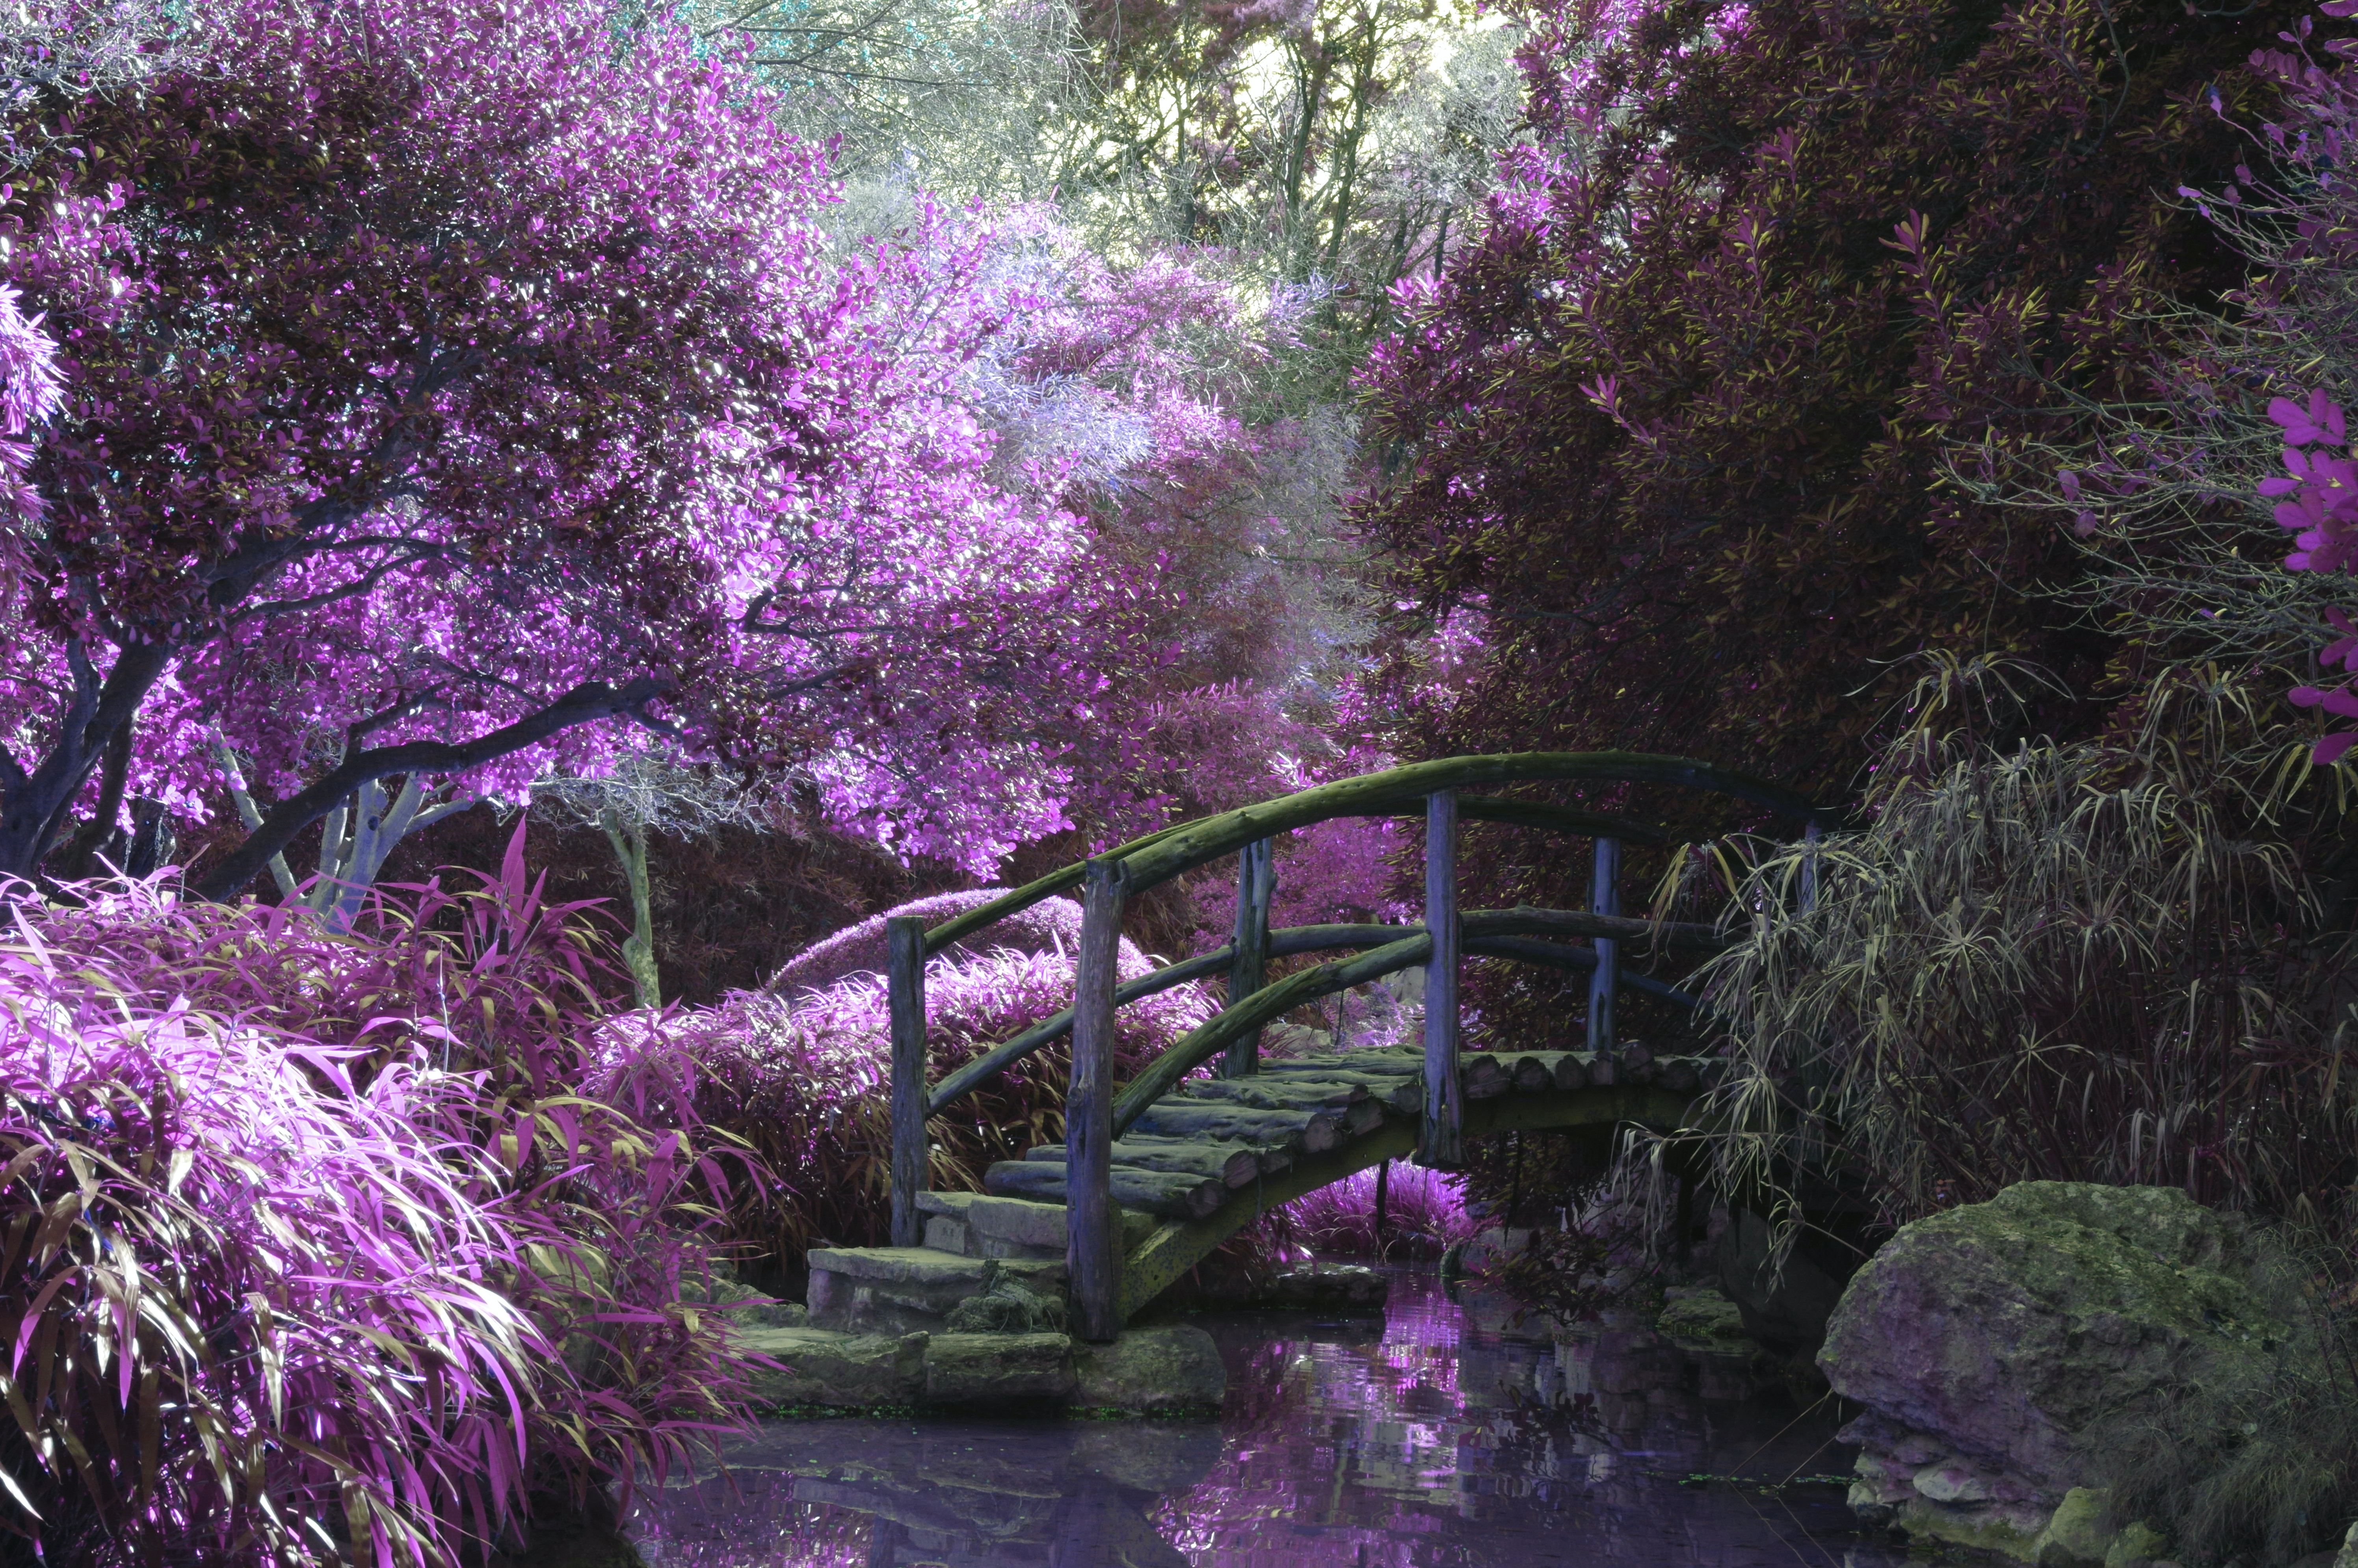 An old wooden bridge arches over a still stream that reflects the lilac-coloured flowering trees that surround it.